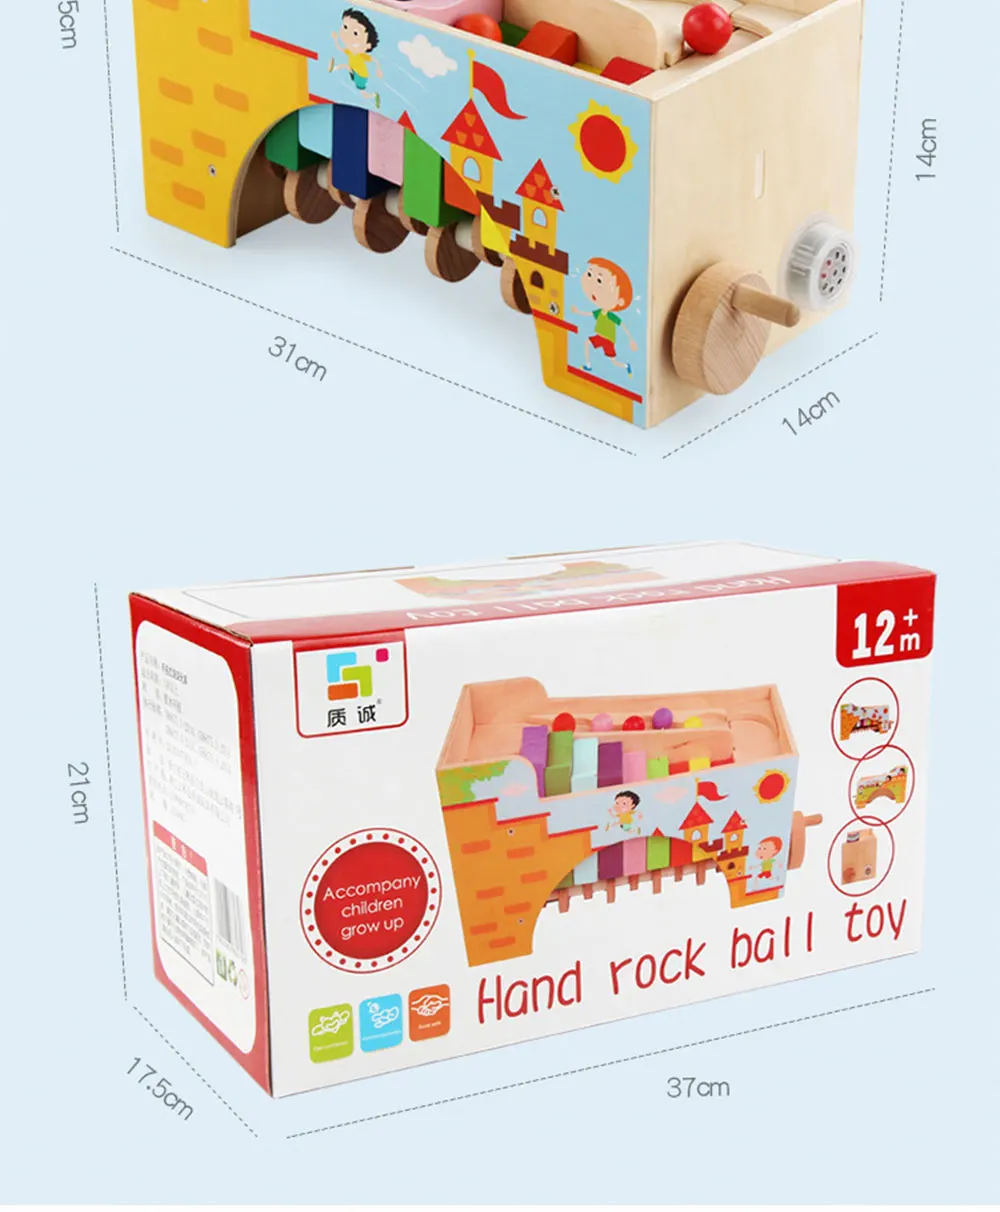 Wooden Toy Hand Rock Ball Toy With Music Accompany Children Grow Up Educational Gift Toy For Infant Toys